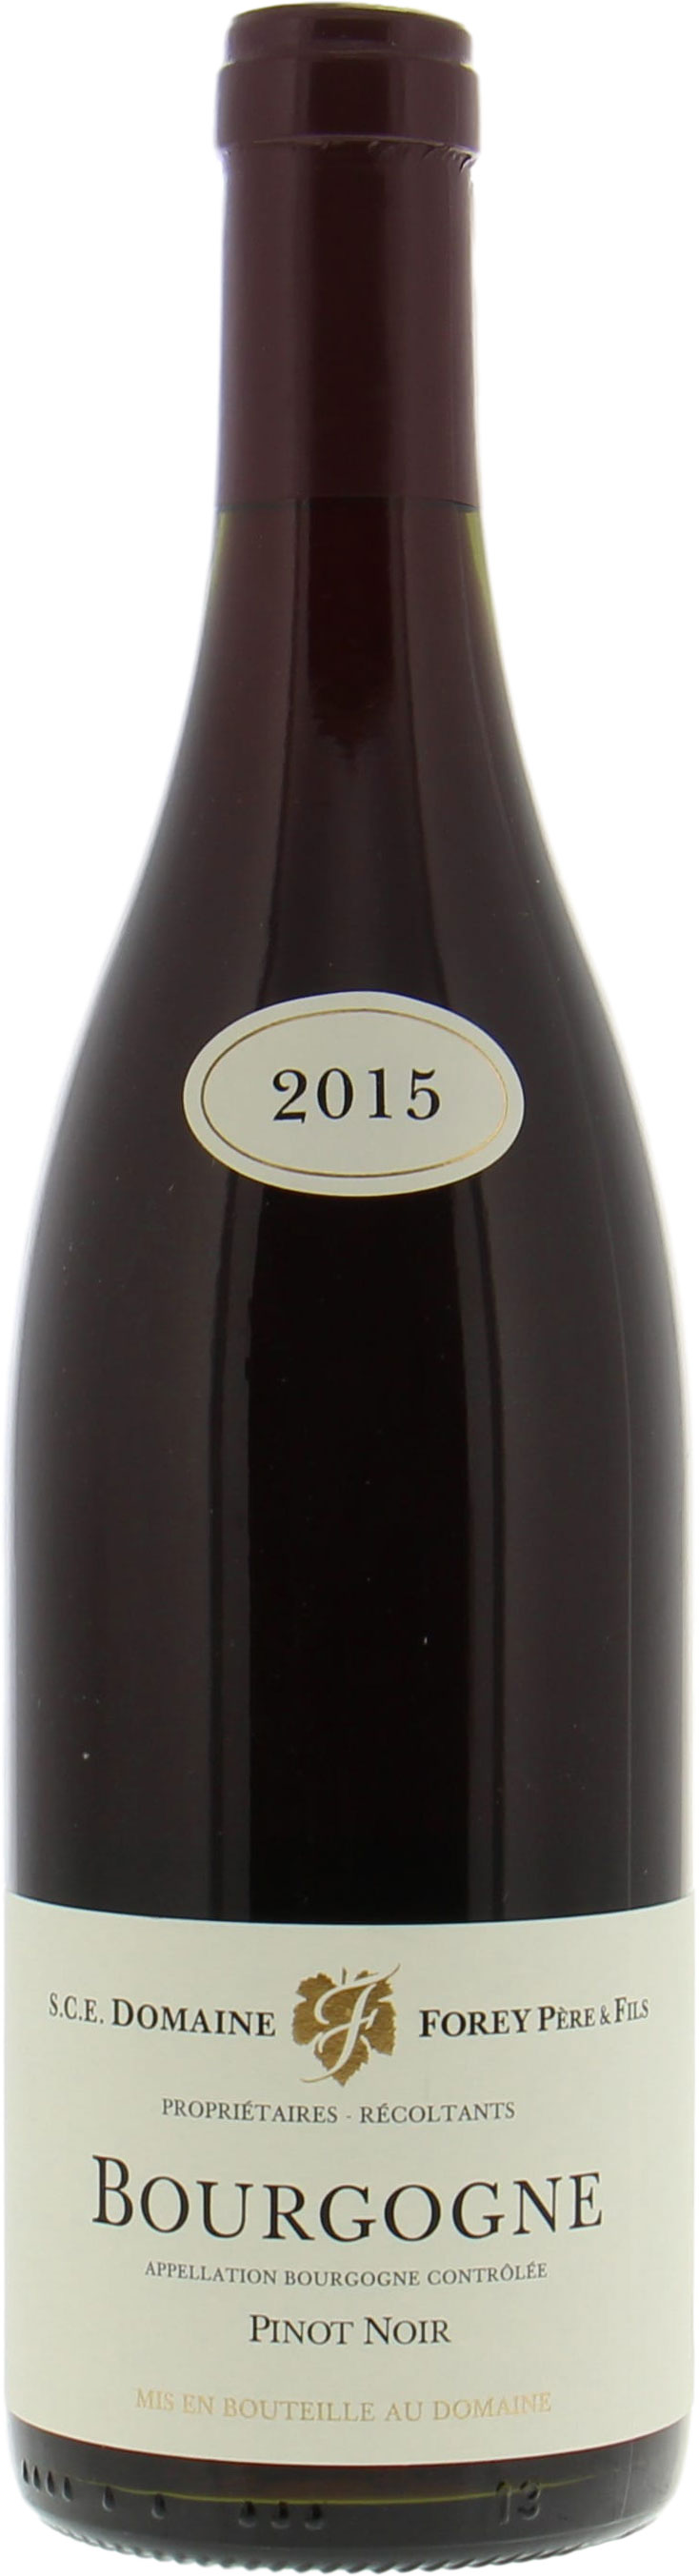 Domaine Forey Pere & Fils - Bourgogne Pinot Noir 2015 Perfect